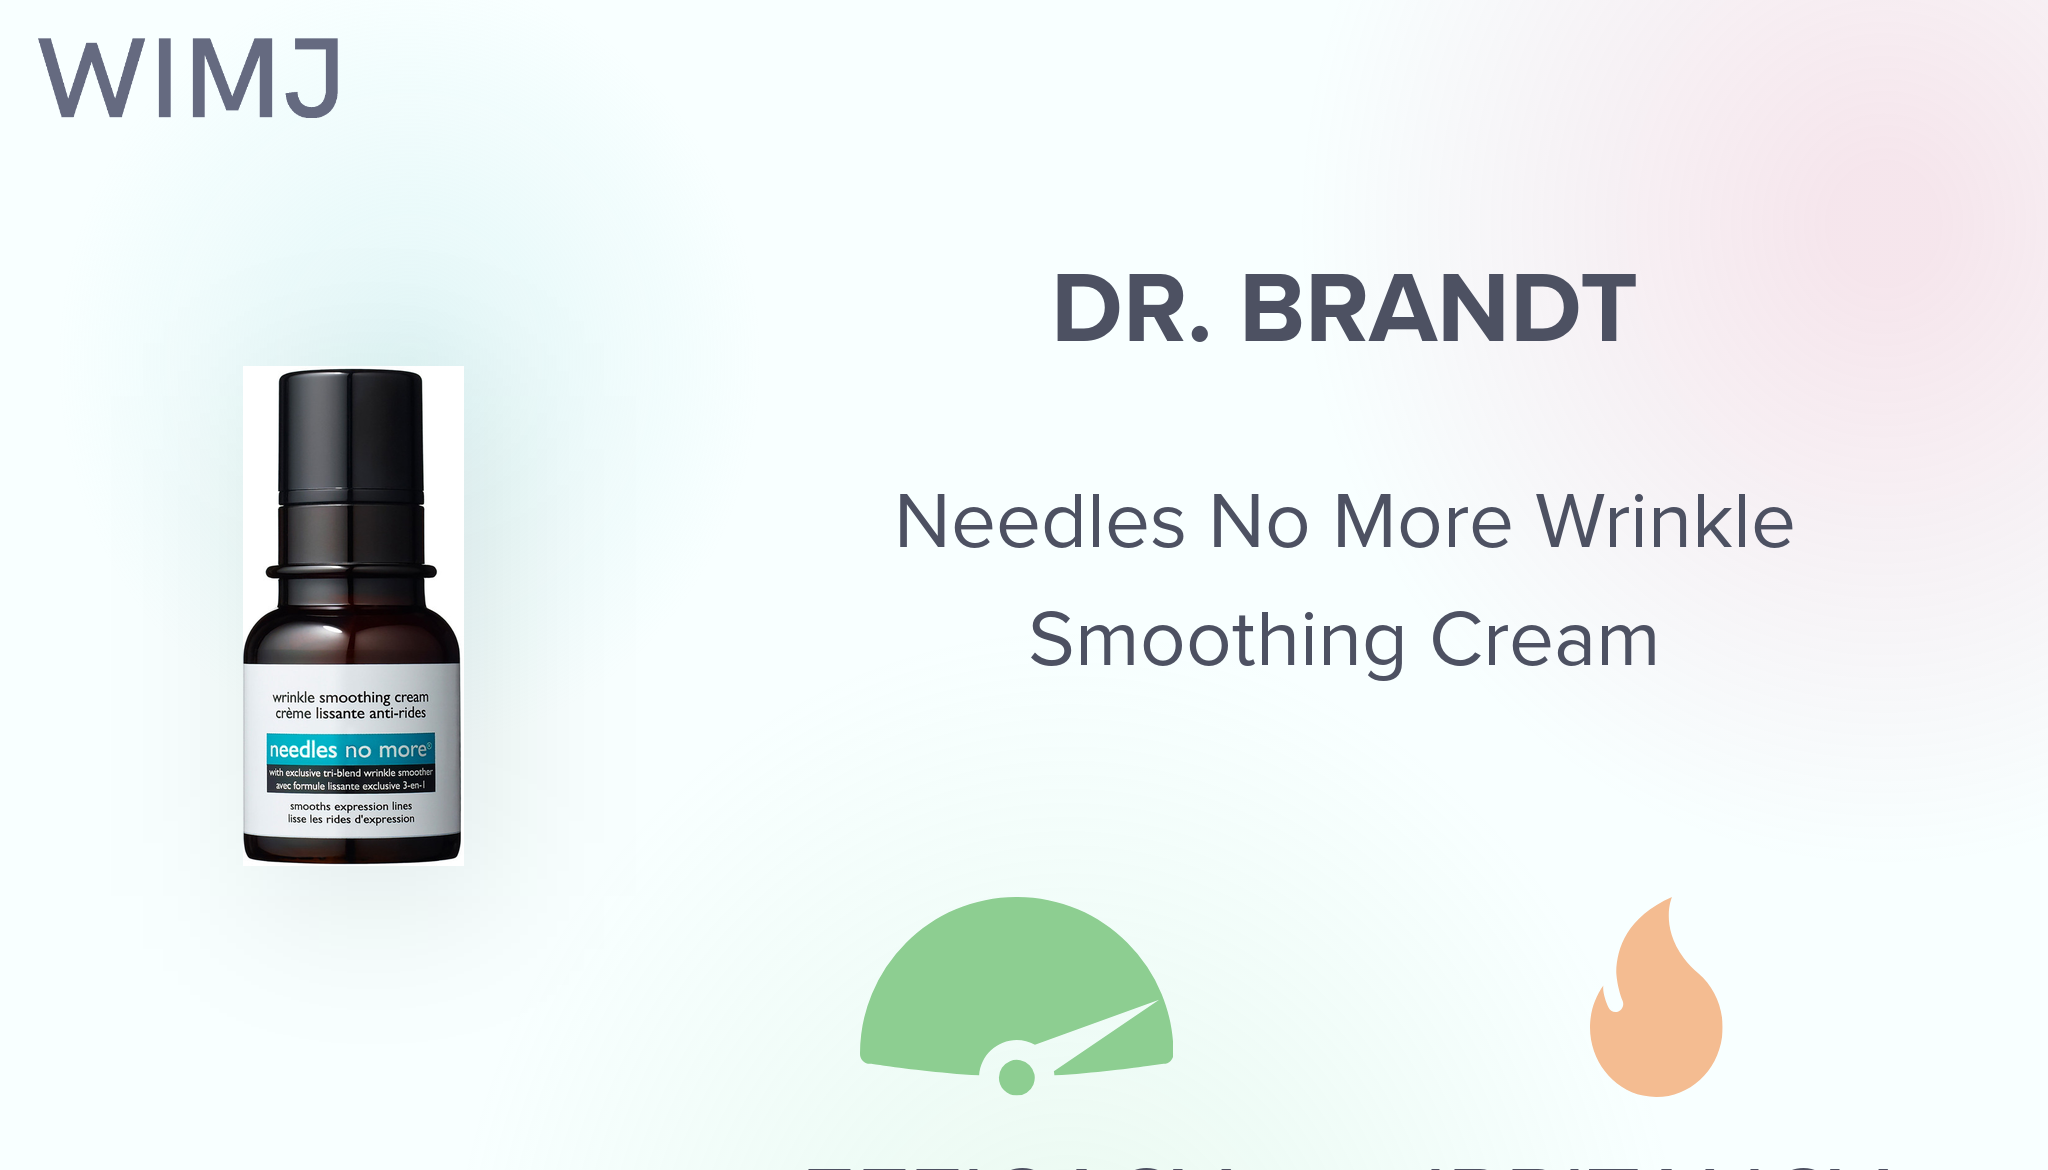 Reviewed: Dr. Brandt Needles No More Wrinkle Smoothing Cream